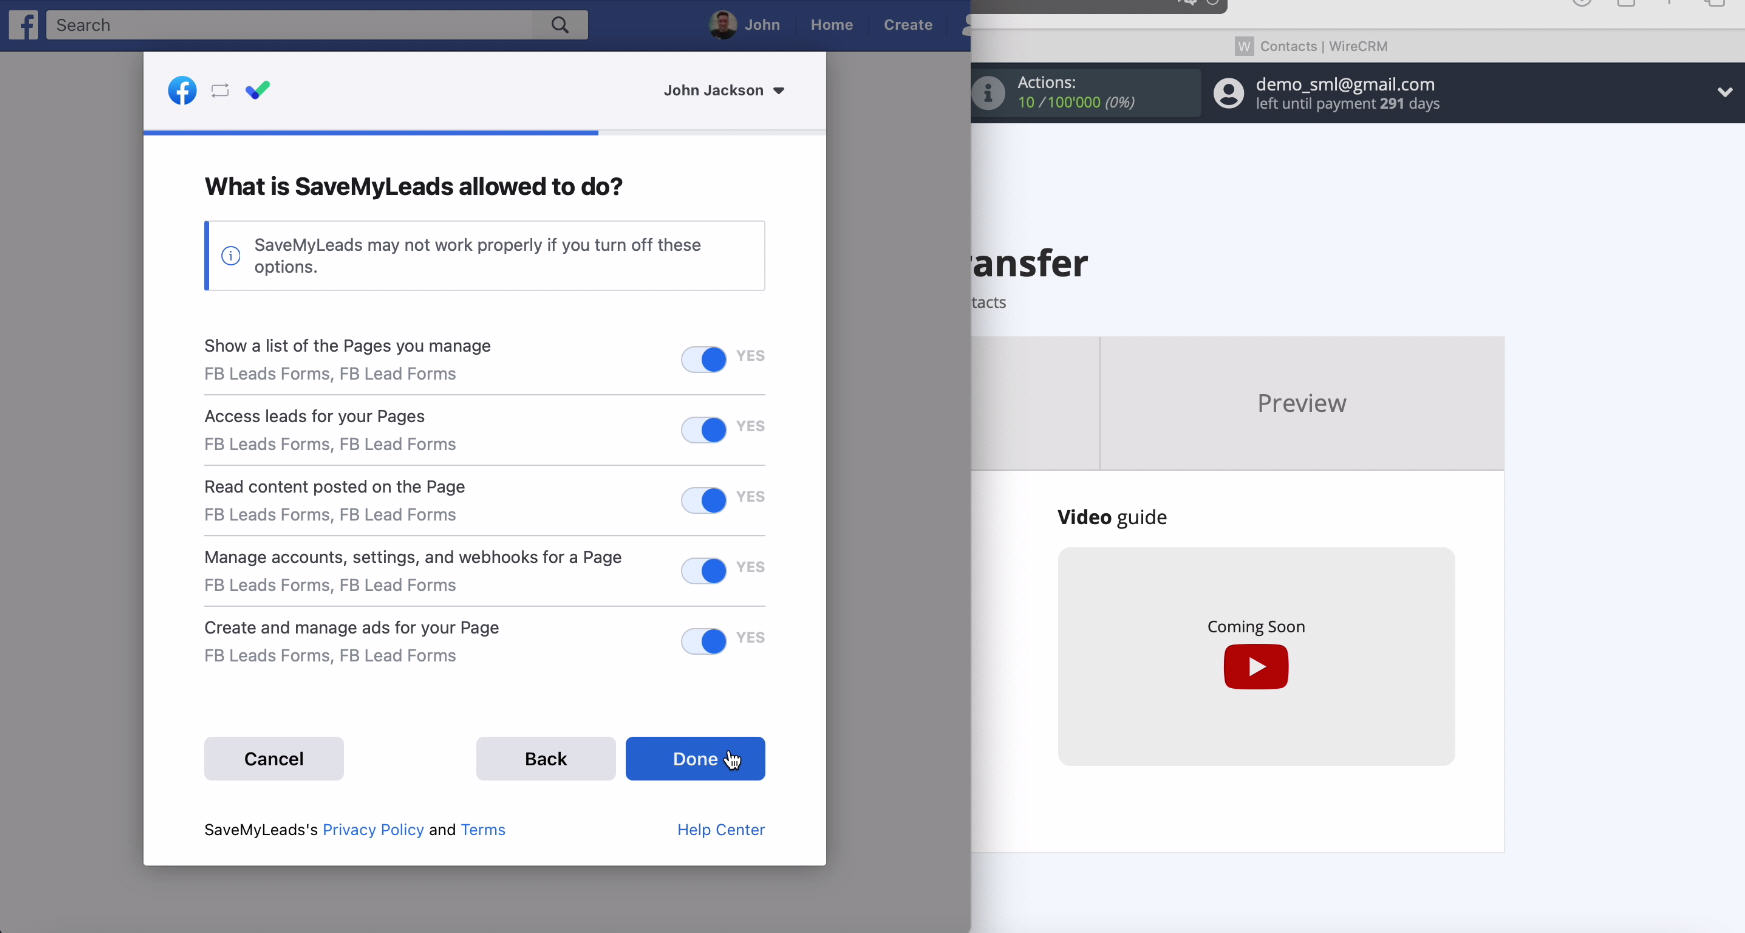 Facebook and WireCRM integration | Grant access